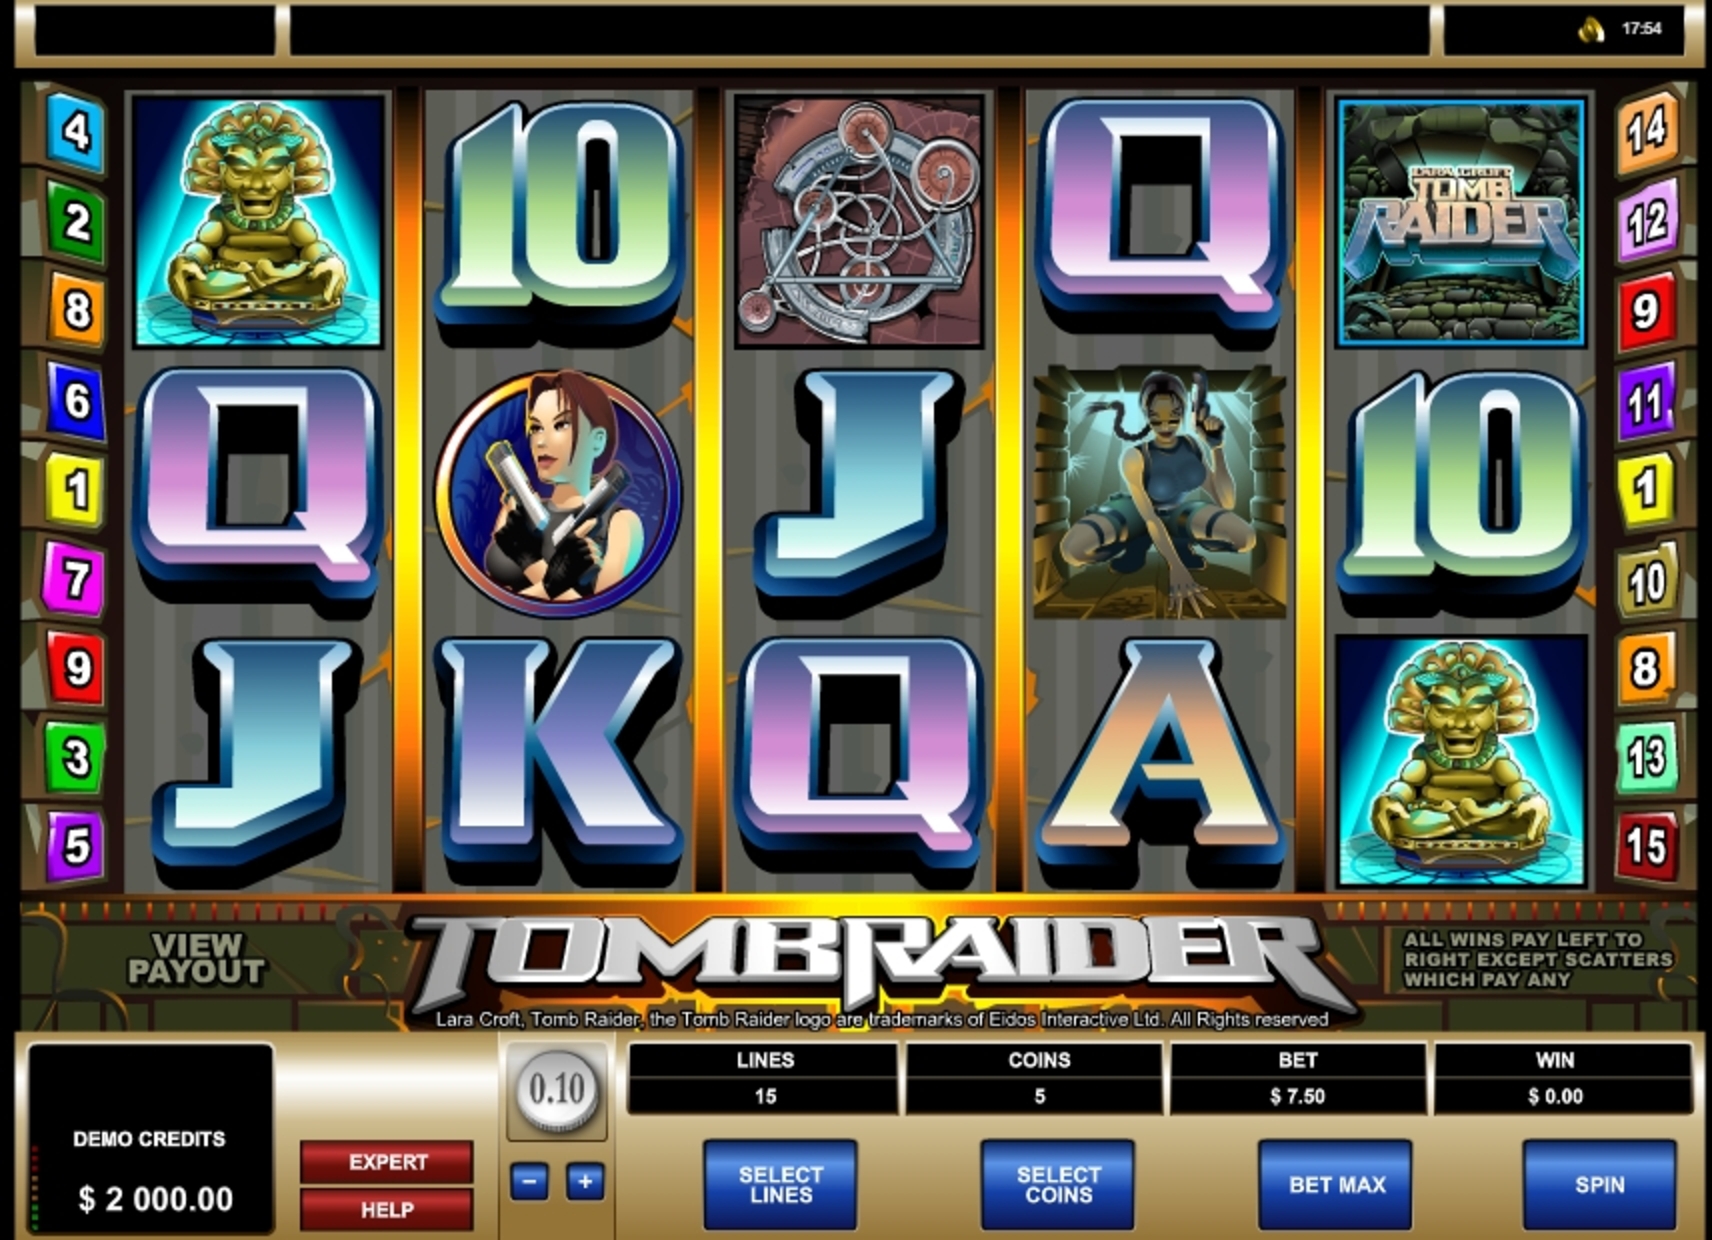 Reels in Tomb Raider Slot Game by Microgaming